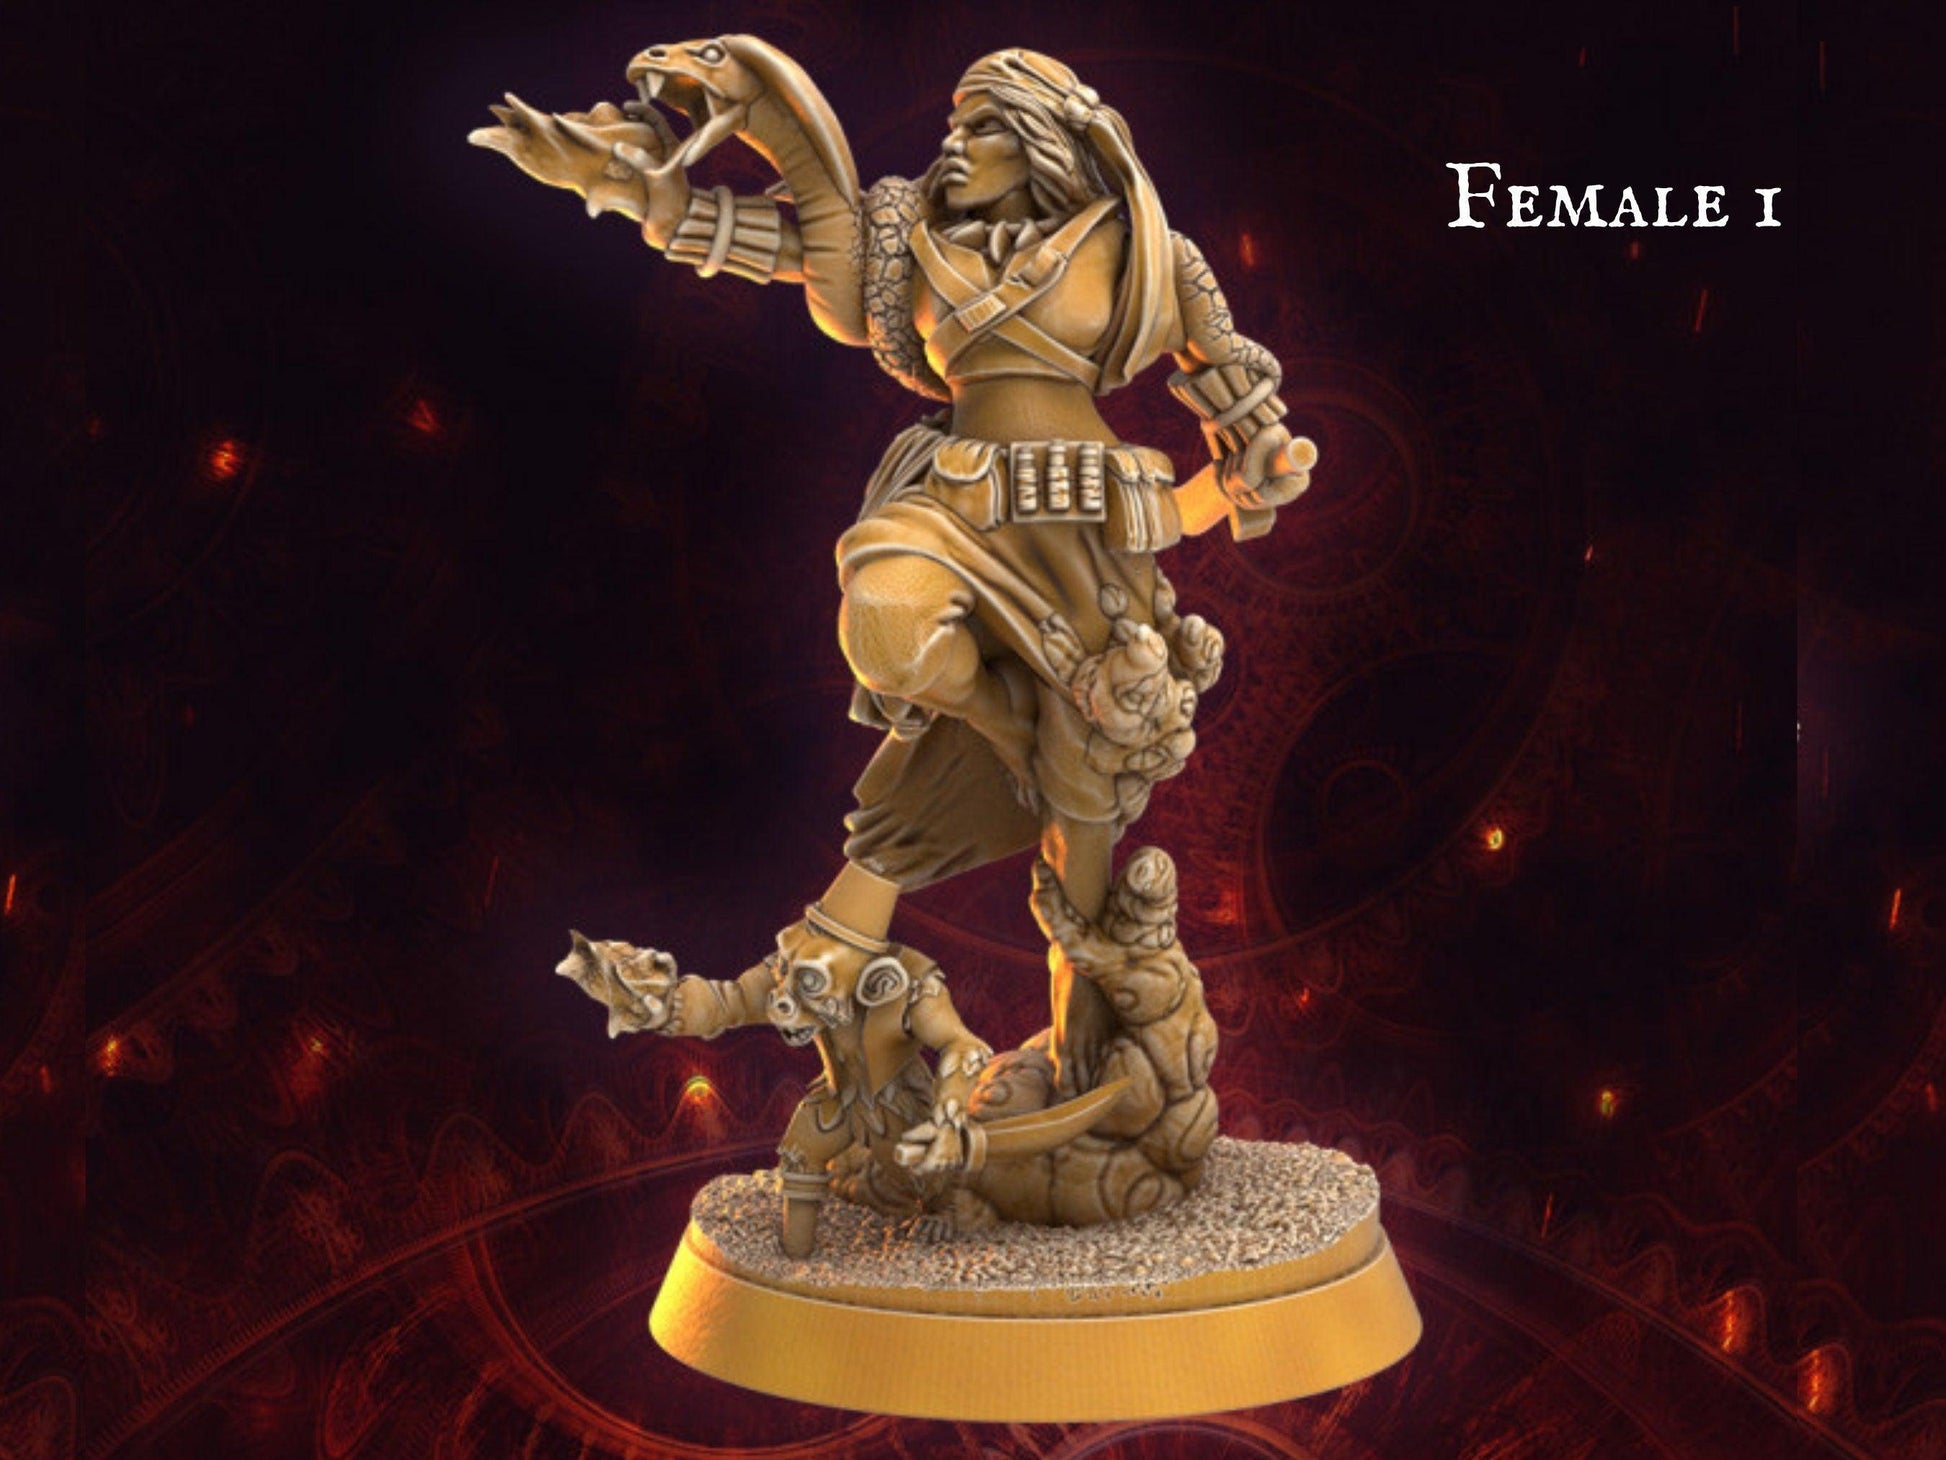 Female Human Pirate miniature monster miniature - 32mm scale Tabletop gaming DnD Miniature Dungeons and Dragons, wargaming dnd pirate figurine - Plague Miniatures shop for DnD Miniatures